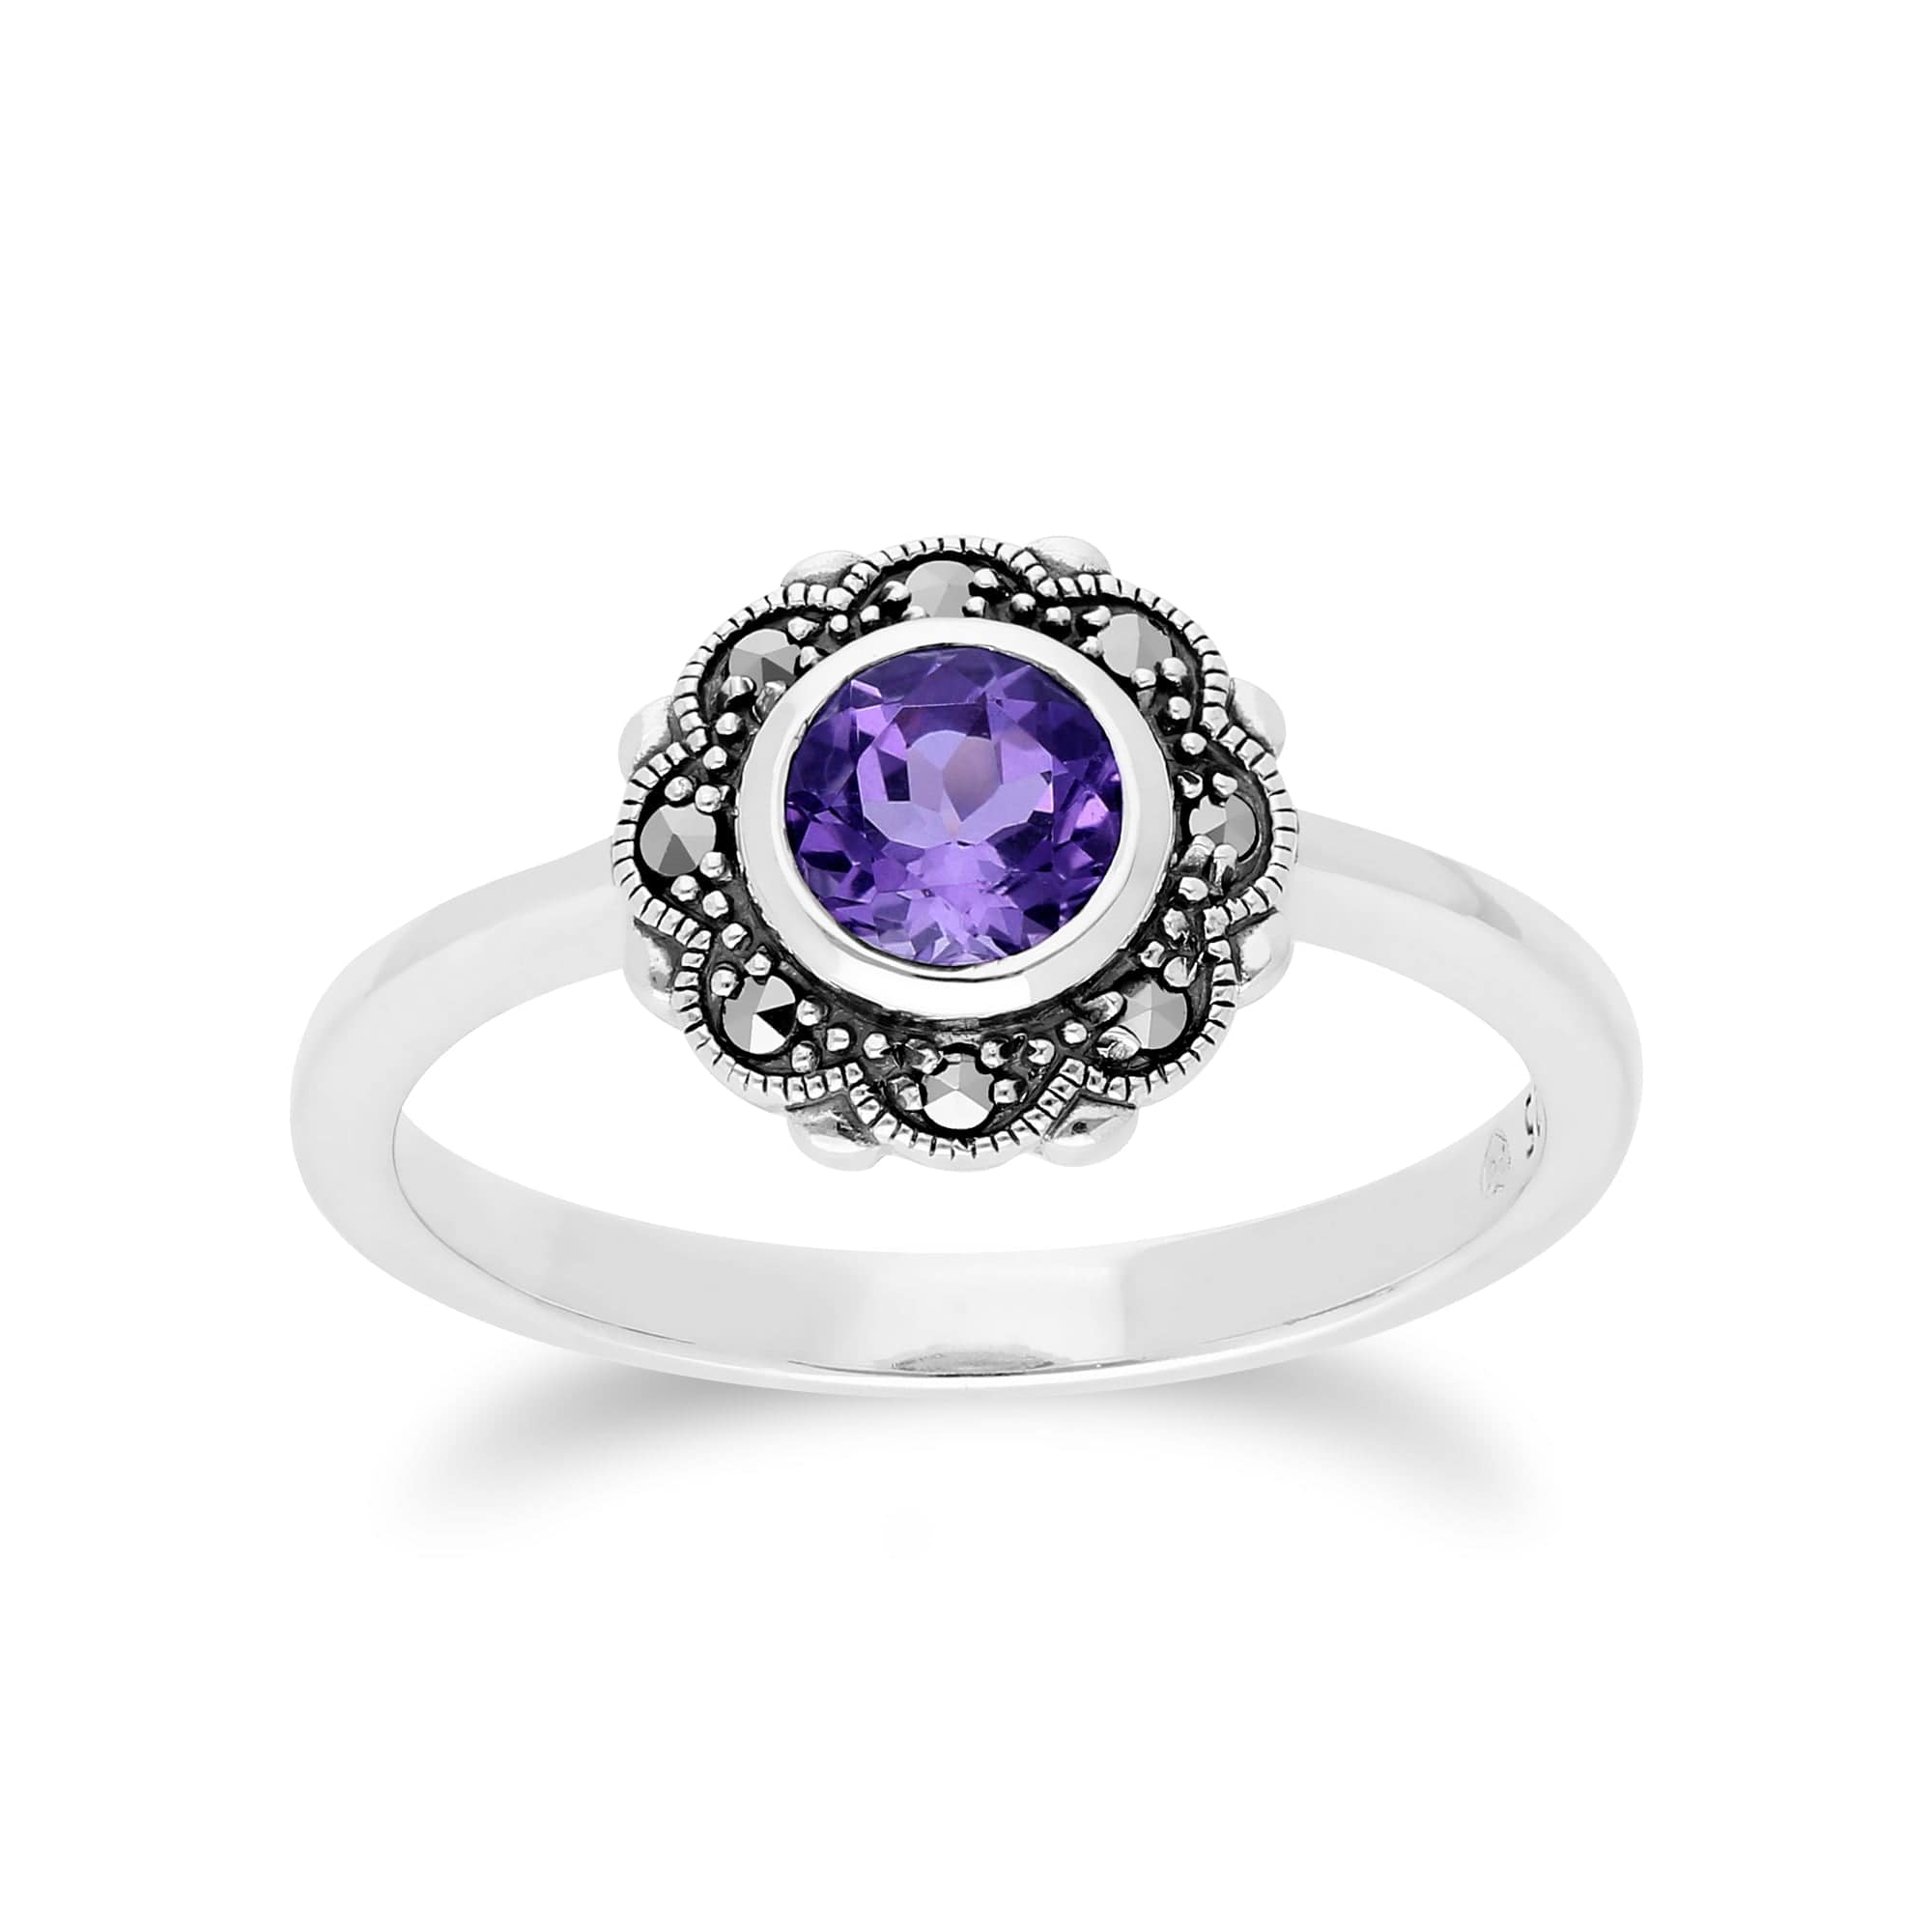 214R597002925 Floral Round Amethyst & Marcasite Halo Ring in 925 Sterling Silver 1